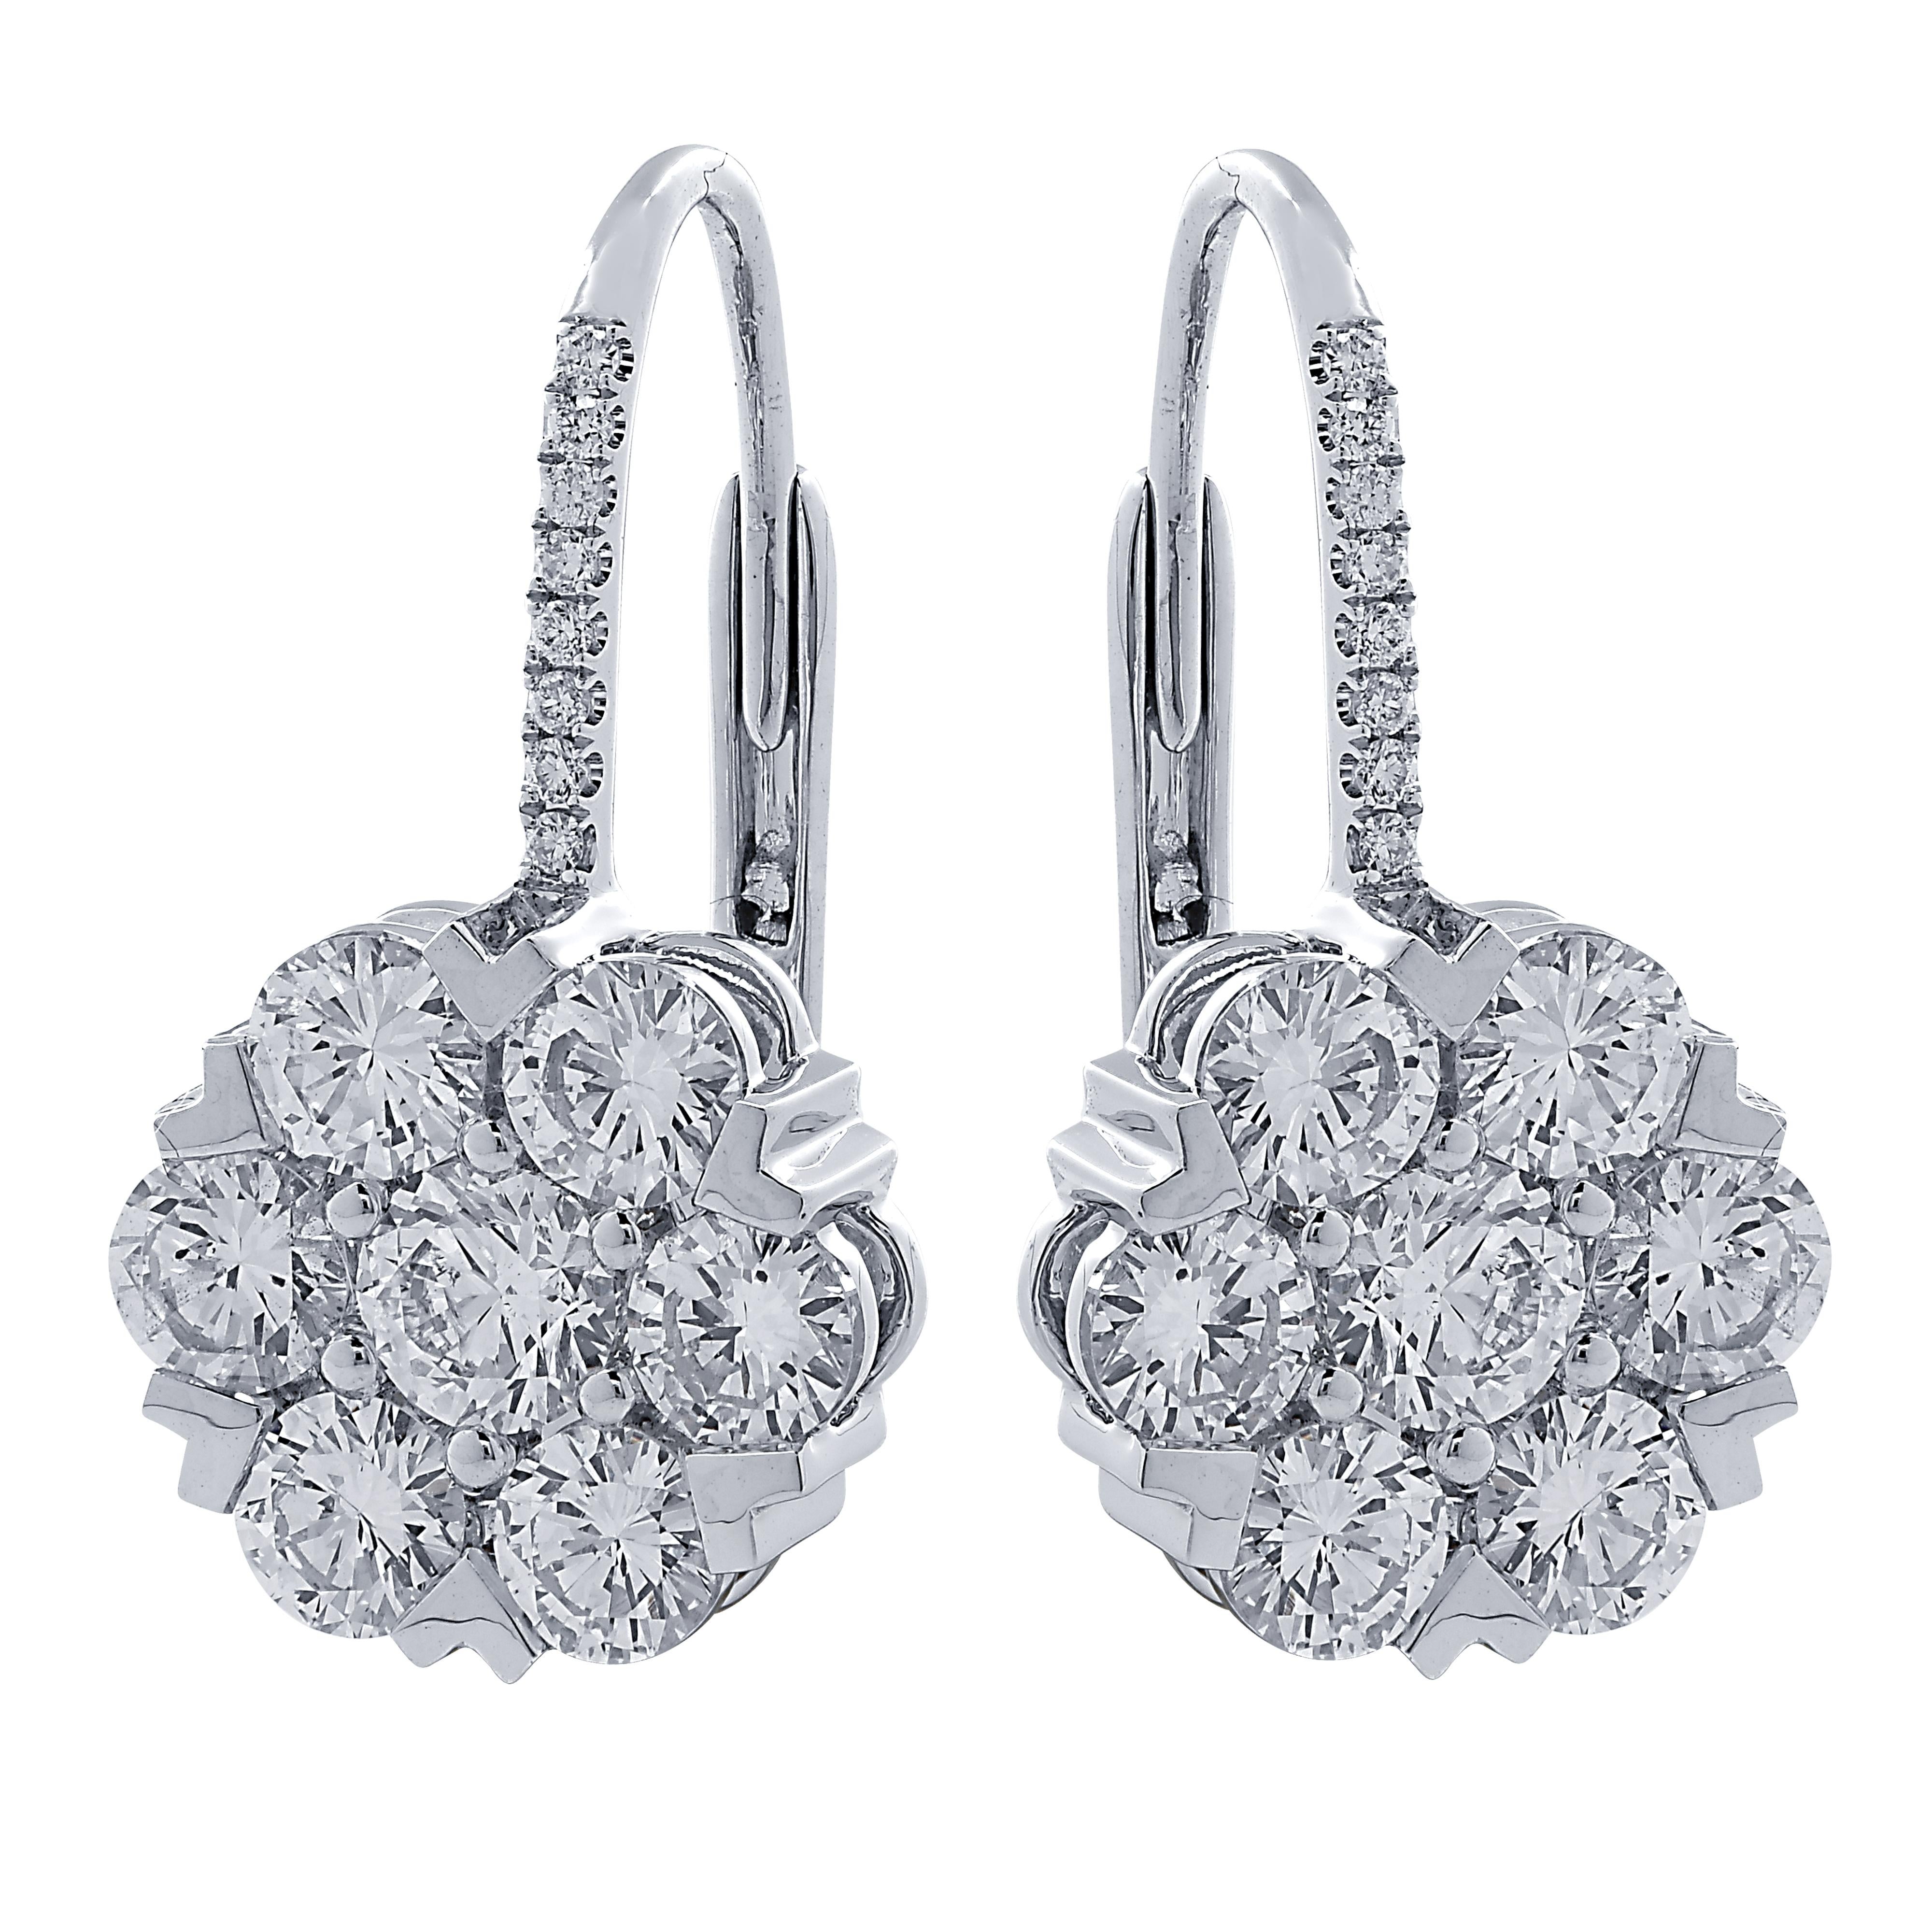 Stunning diamond dangle earrings crafted in 18 karat white gold. The drops feature 30 round brilliant cut diamonds weighing approximately  2.87 carat total weight. The diamonds are graded G color and VS-SI clarity and are arranged in a floral